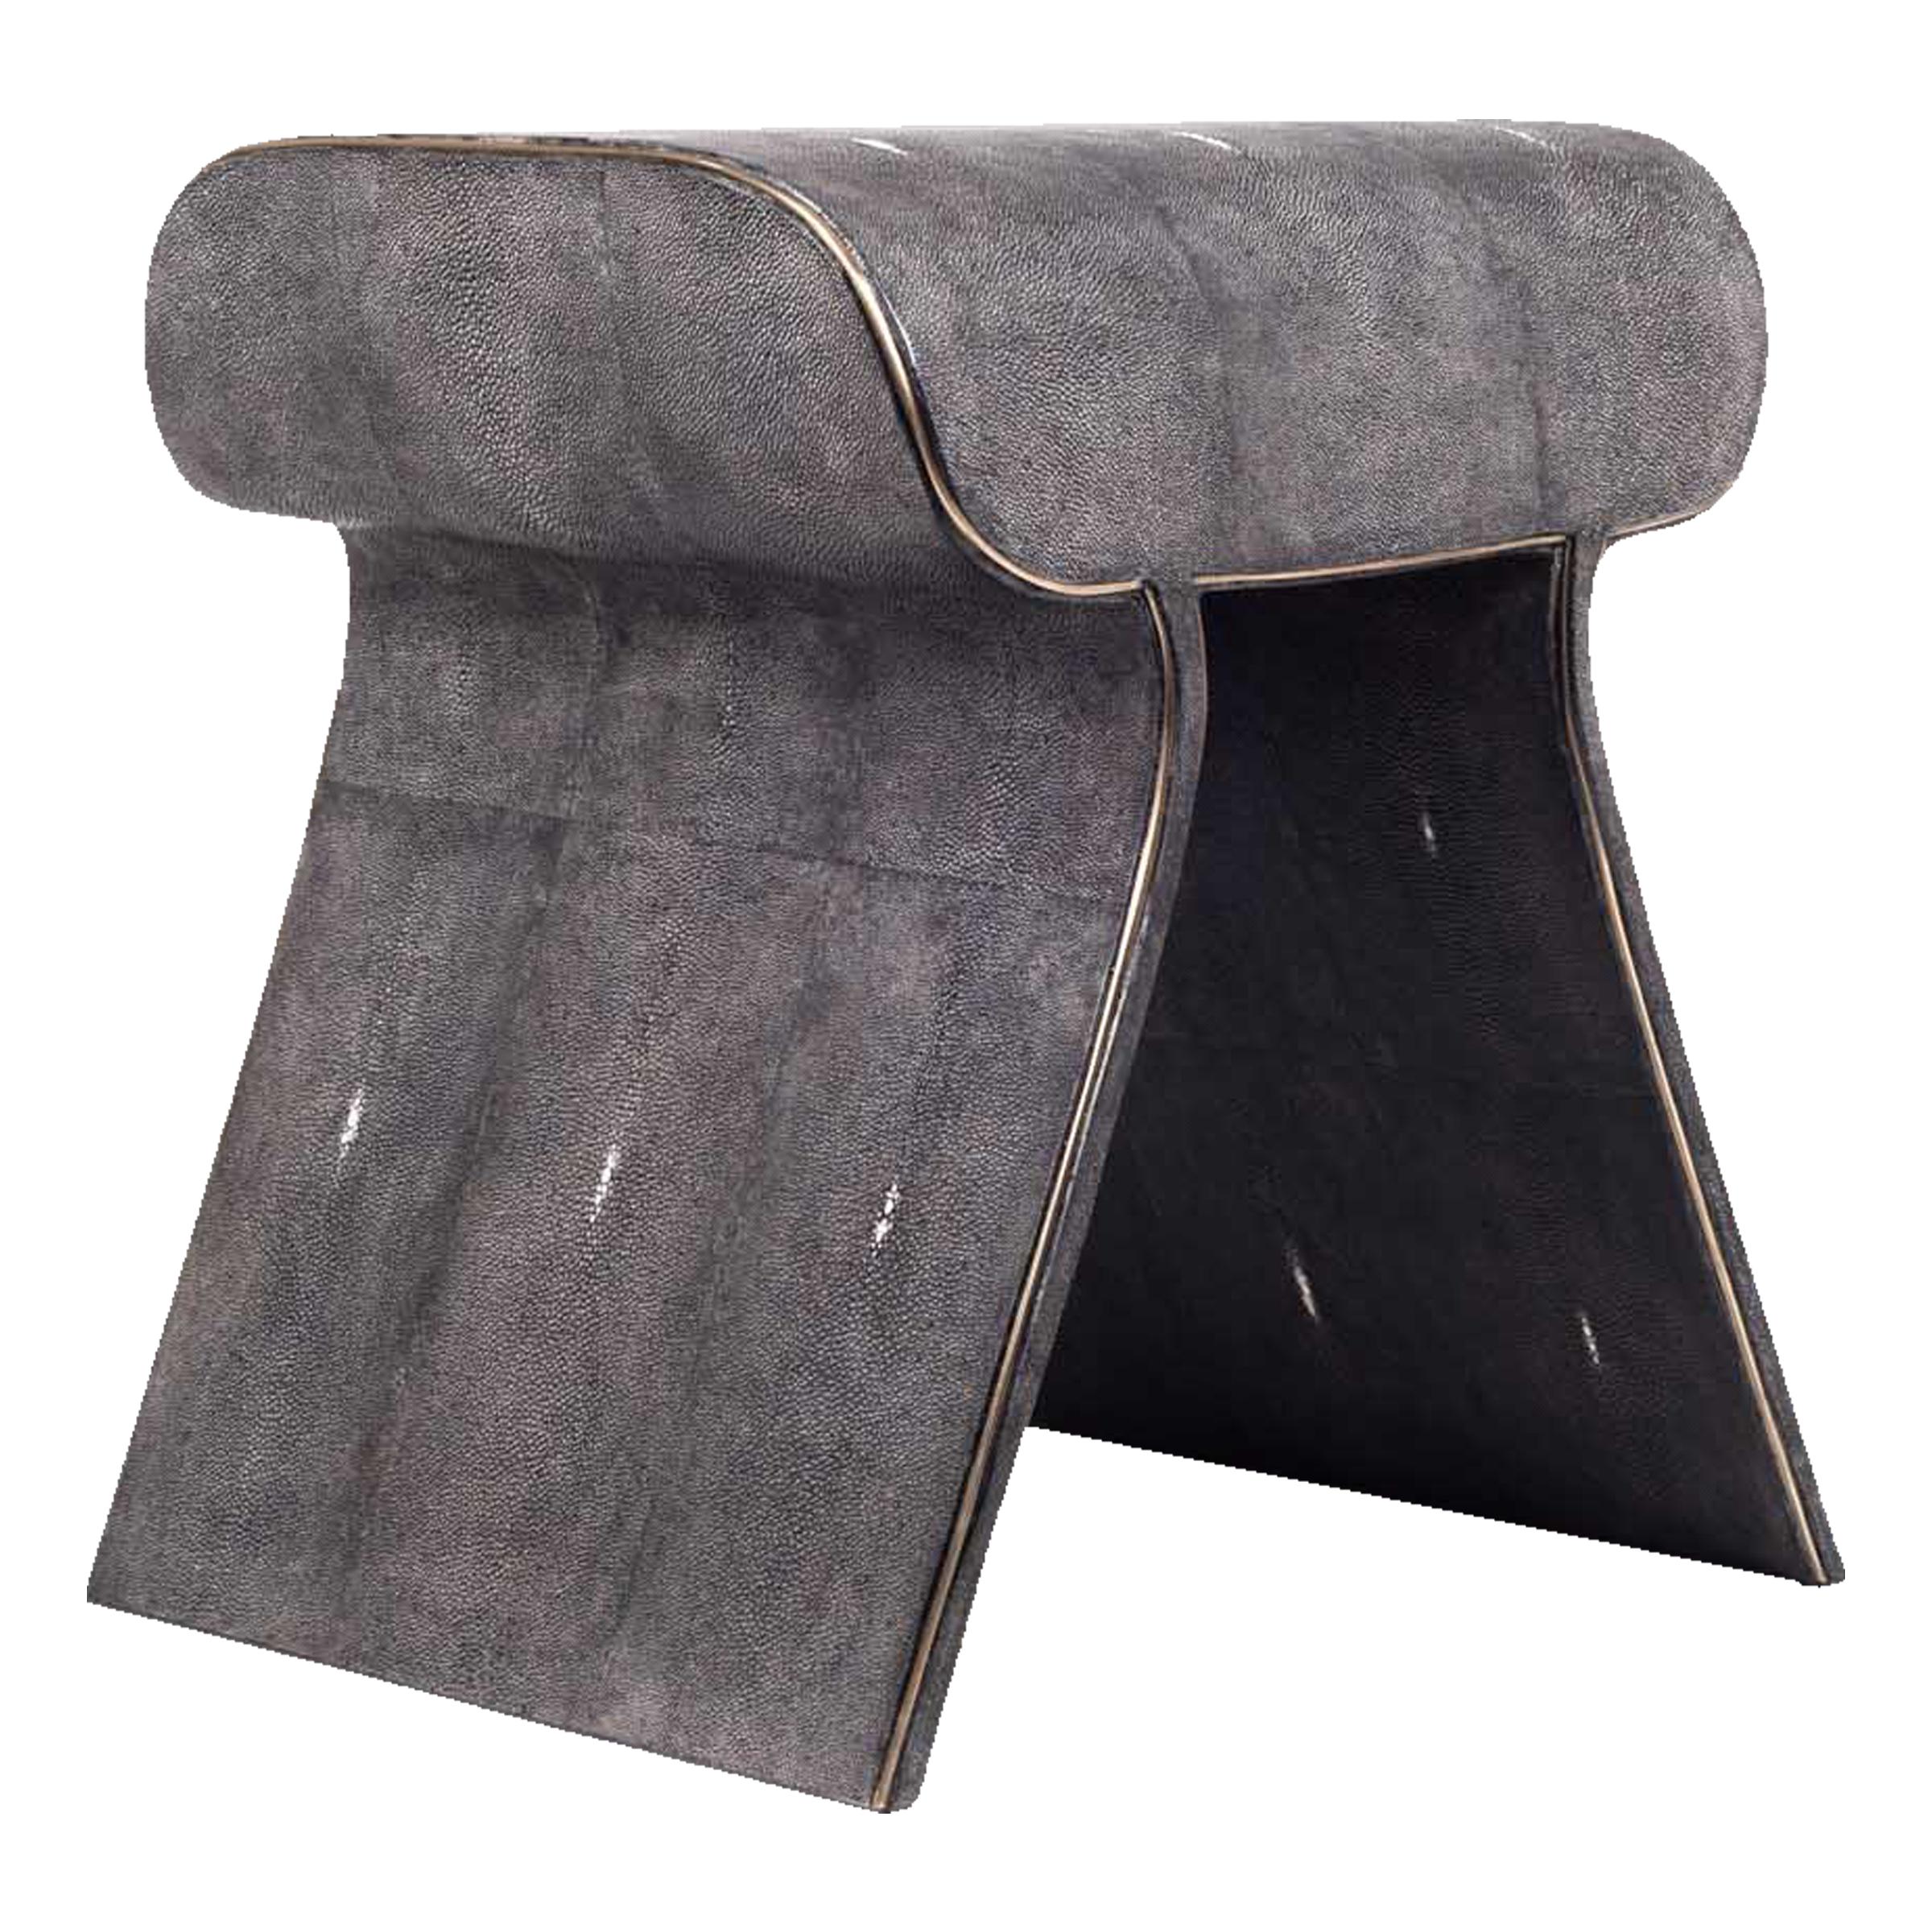 Dandy Stool Upholstered in Cream Fur & Bronze-Patina Brass Details by Kifu Paris For Sale 2